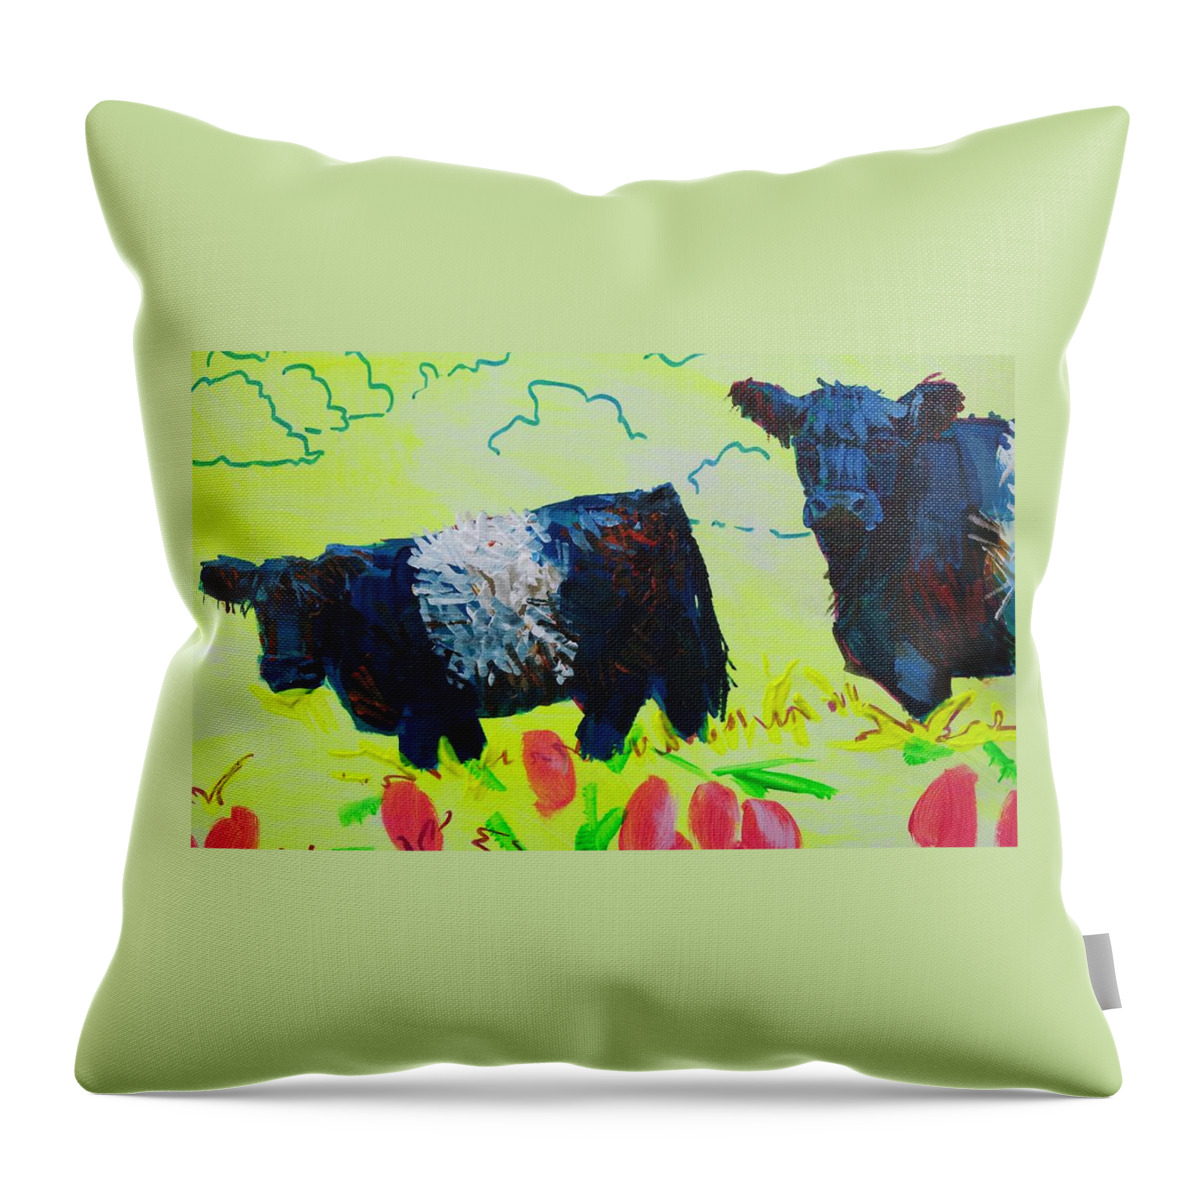 Belted Galloway Cows Throw Pillow featuring the painting Two Belted Galloway Cows Looking At You by Mike Jory